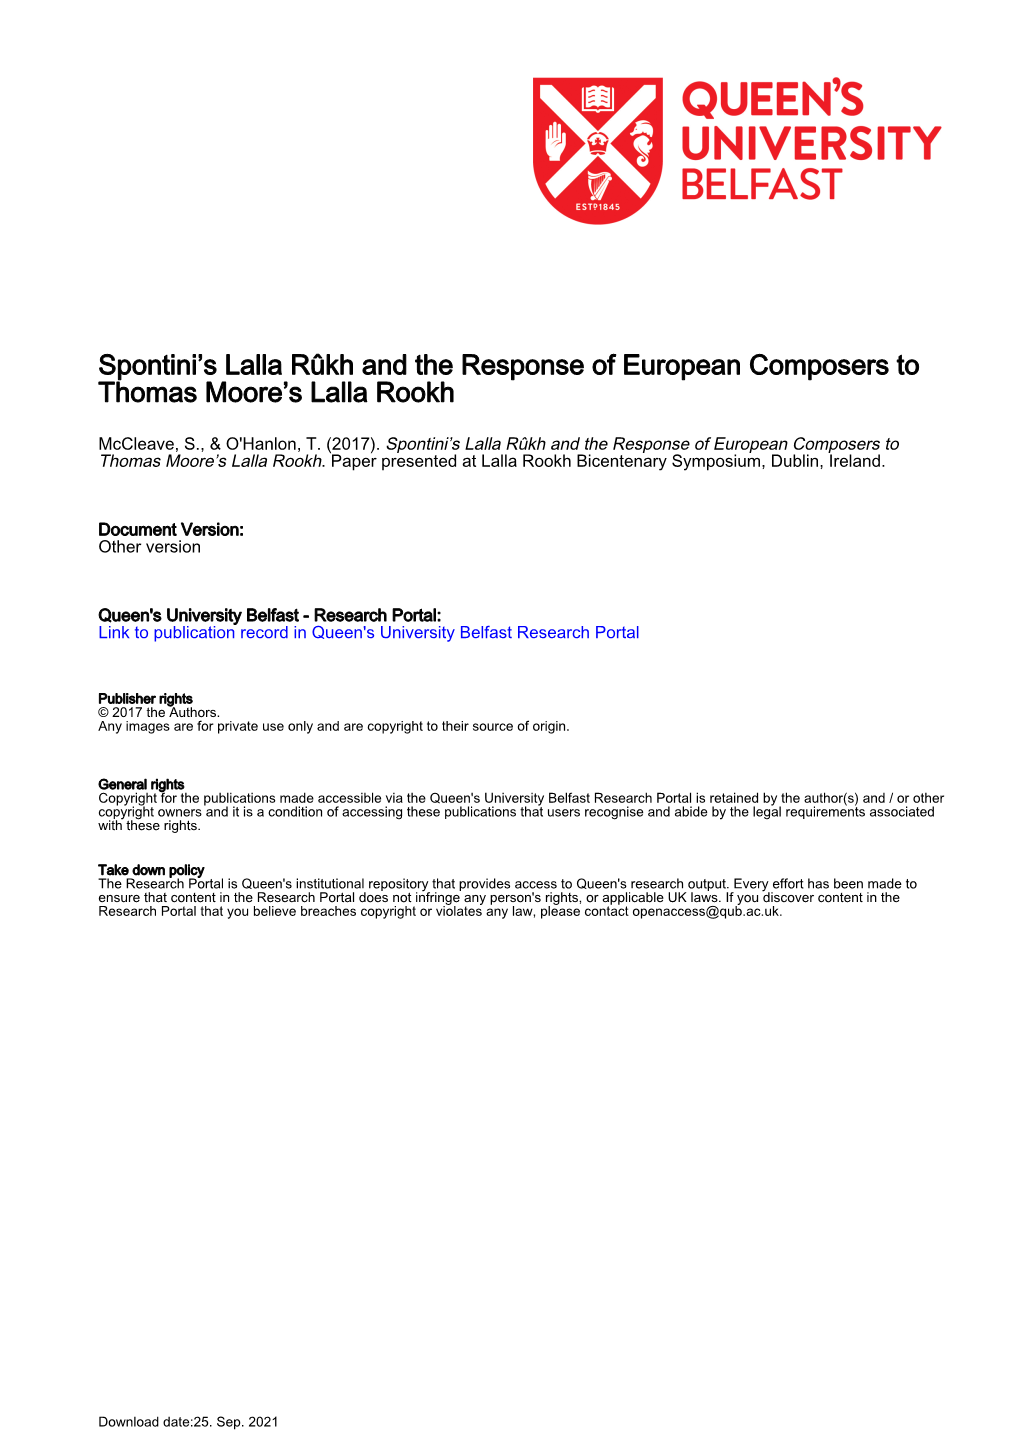 Spontini's Lalla Rûkh and the Response of European Composers to Thomas Moore's Lalla Rookh